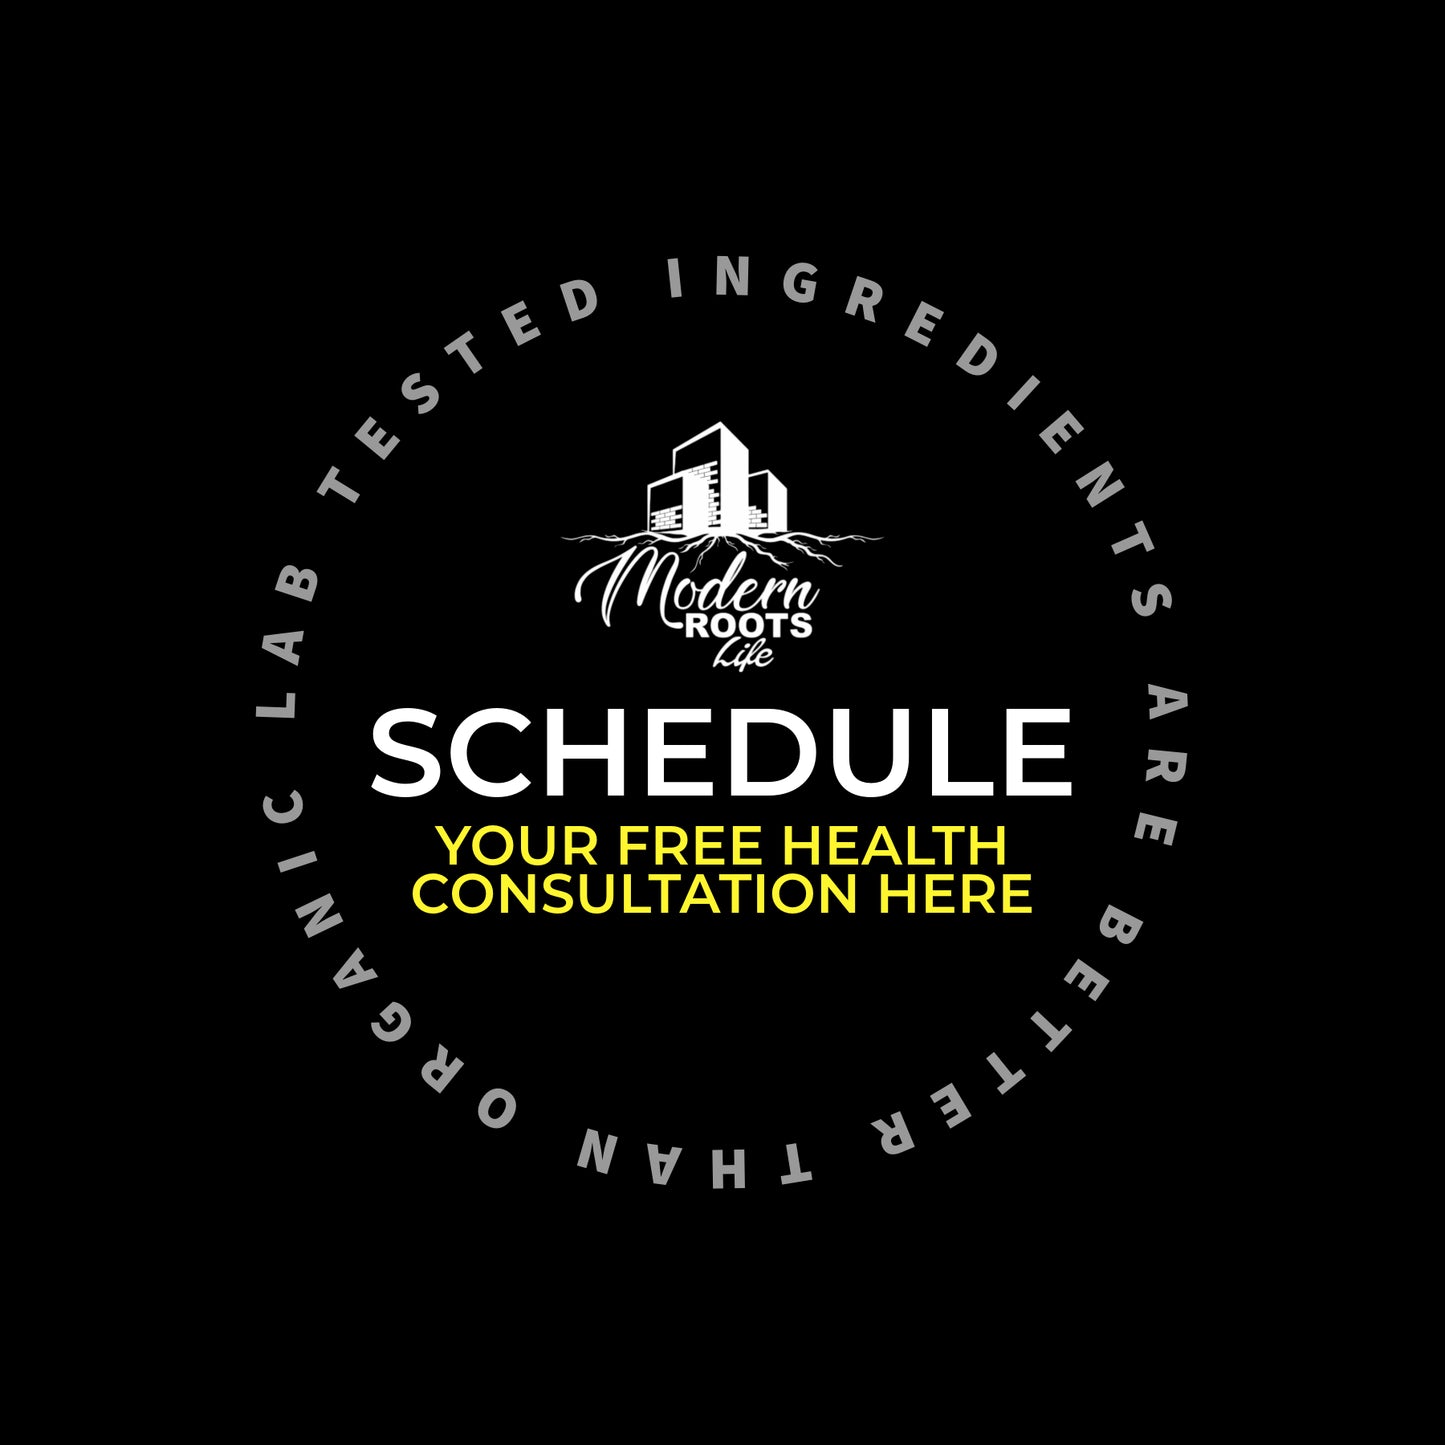 Free Phone Consultation HERE - Schedule Your Consult with Josh